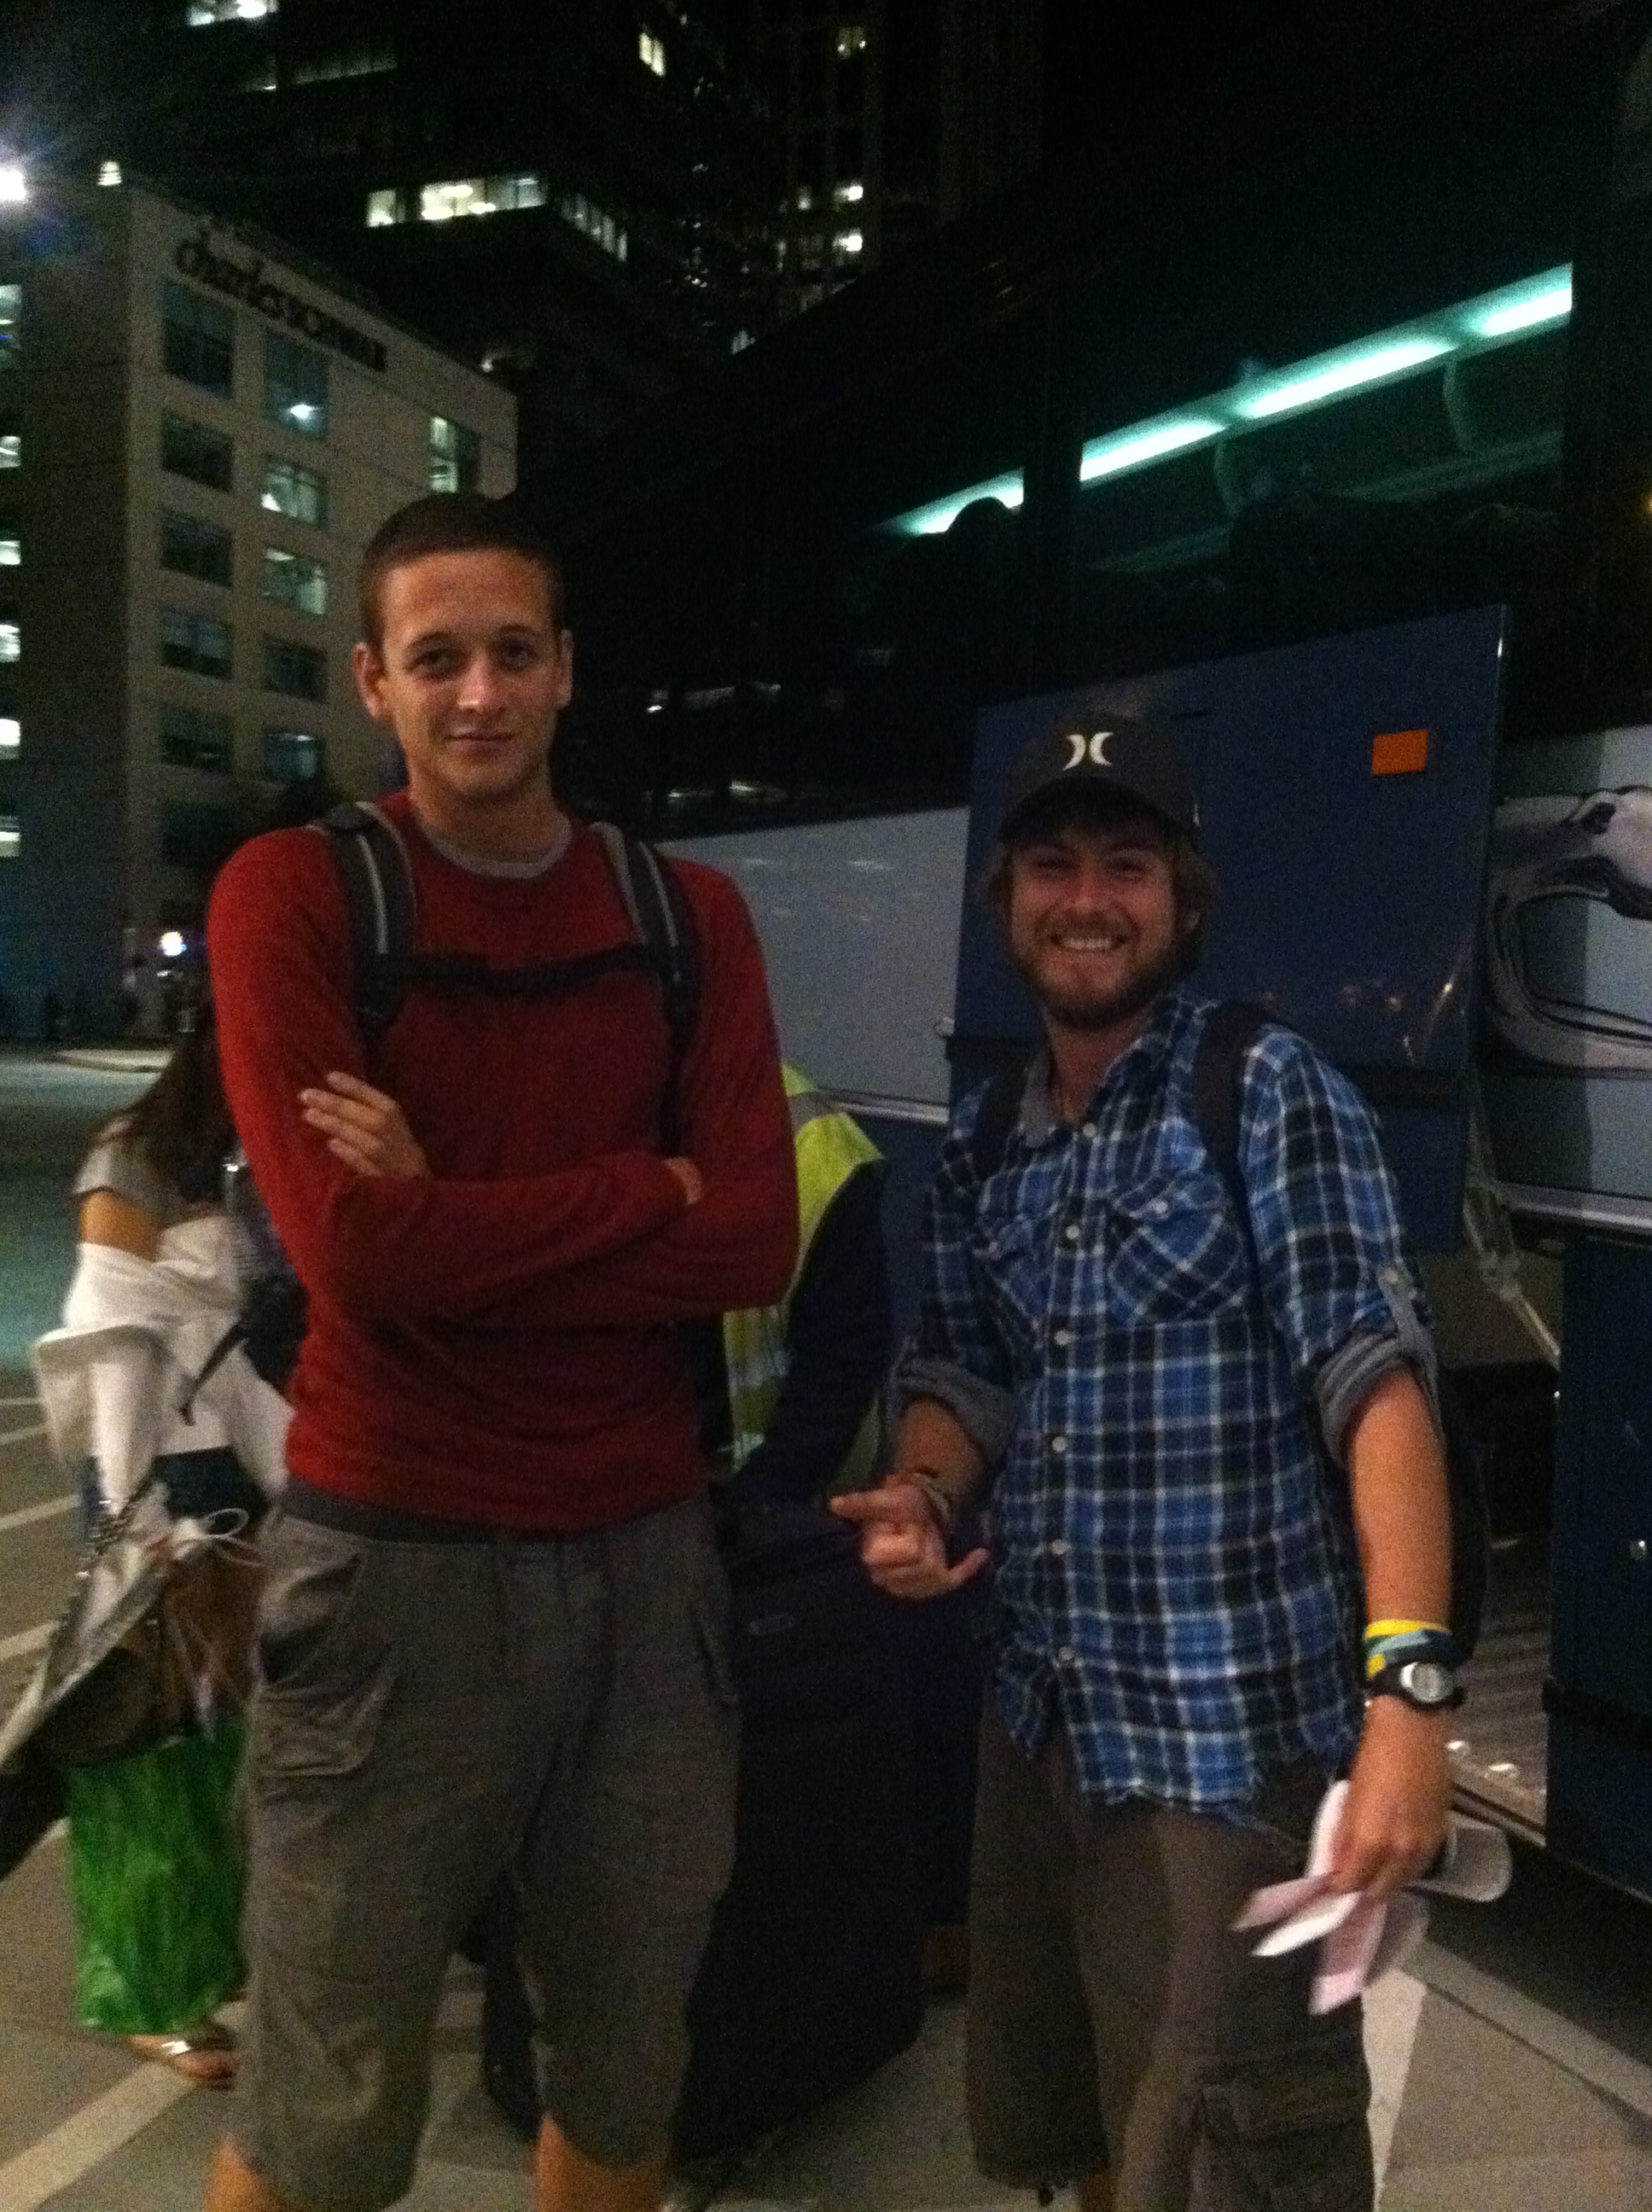 my new friends Dave and Dave outside the Greyhound bus in San Francisco, CA after midnight